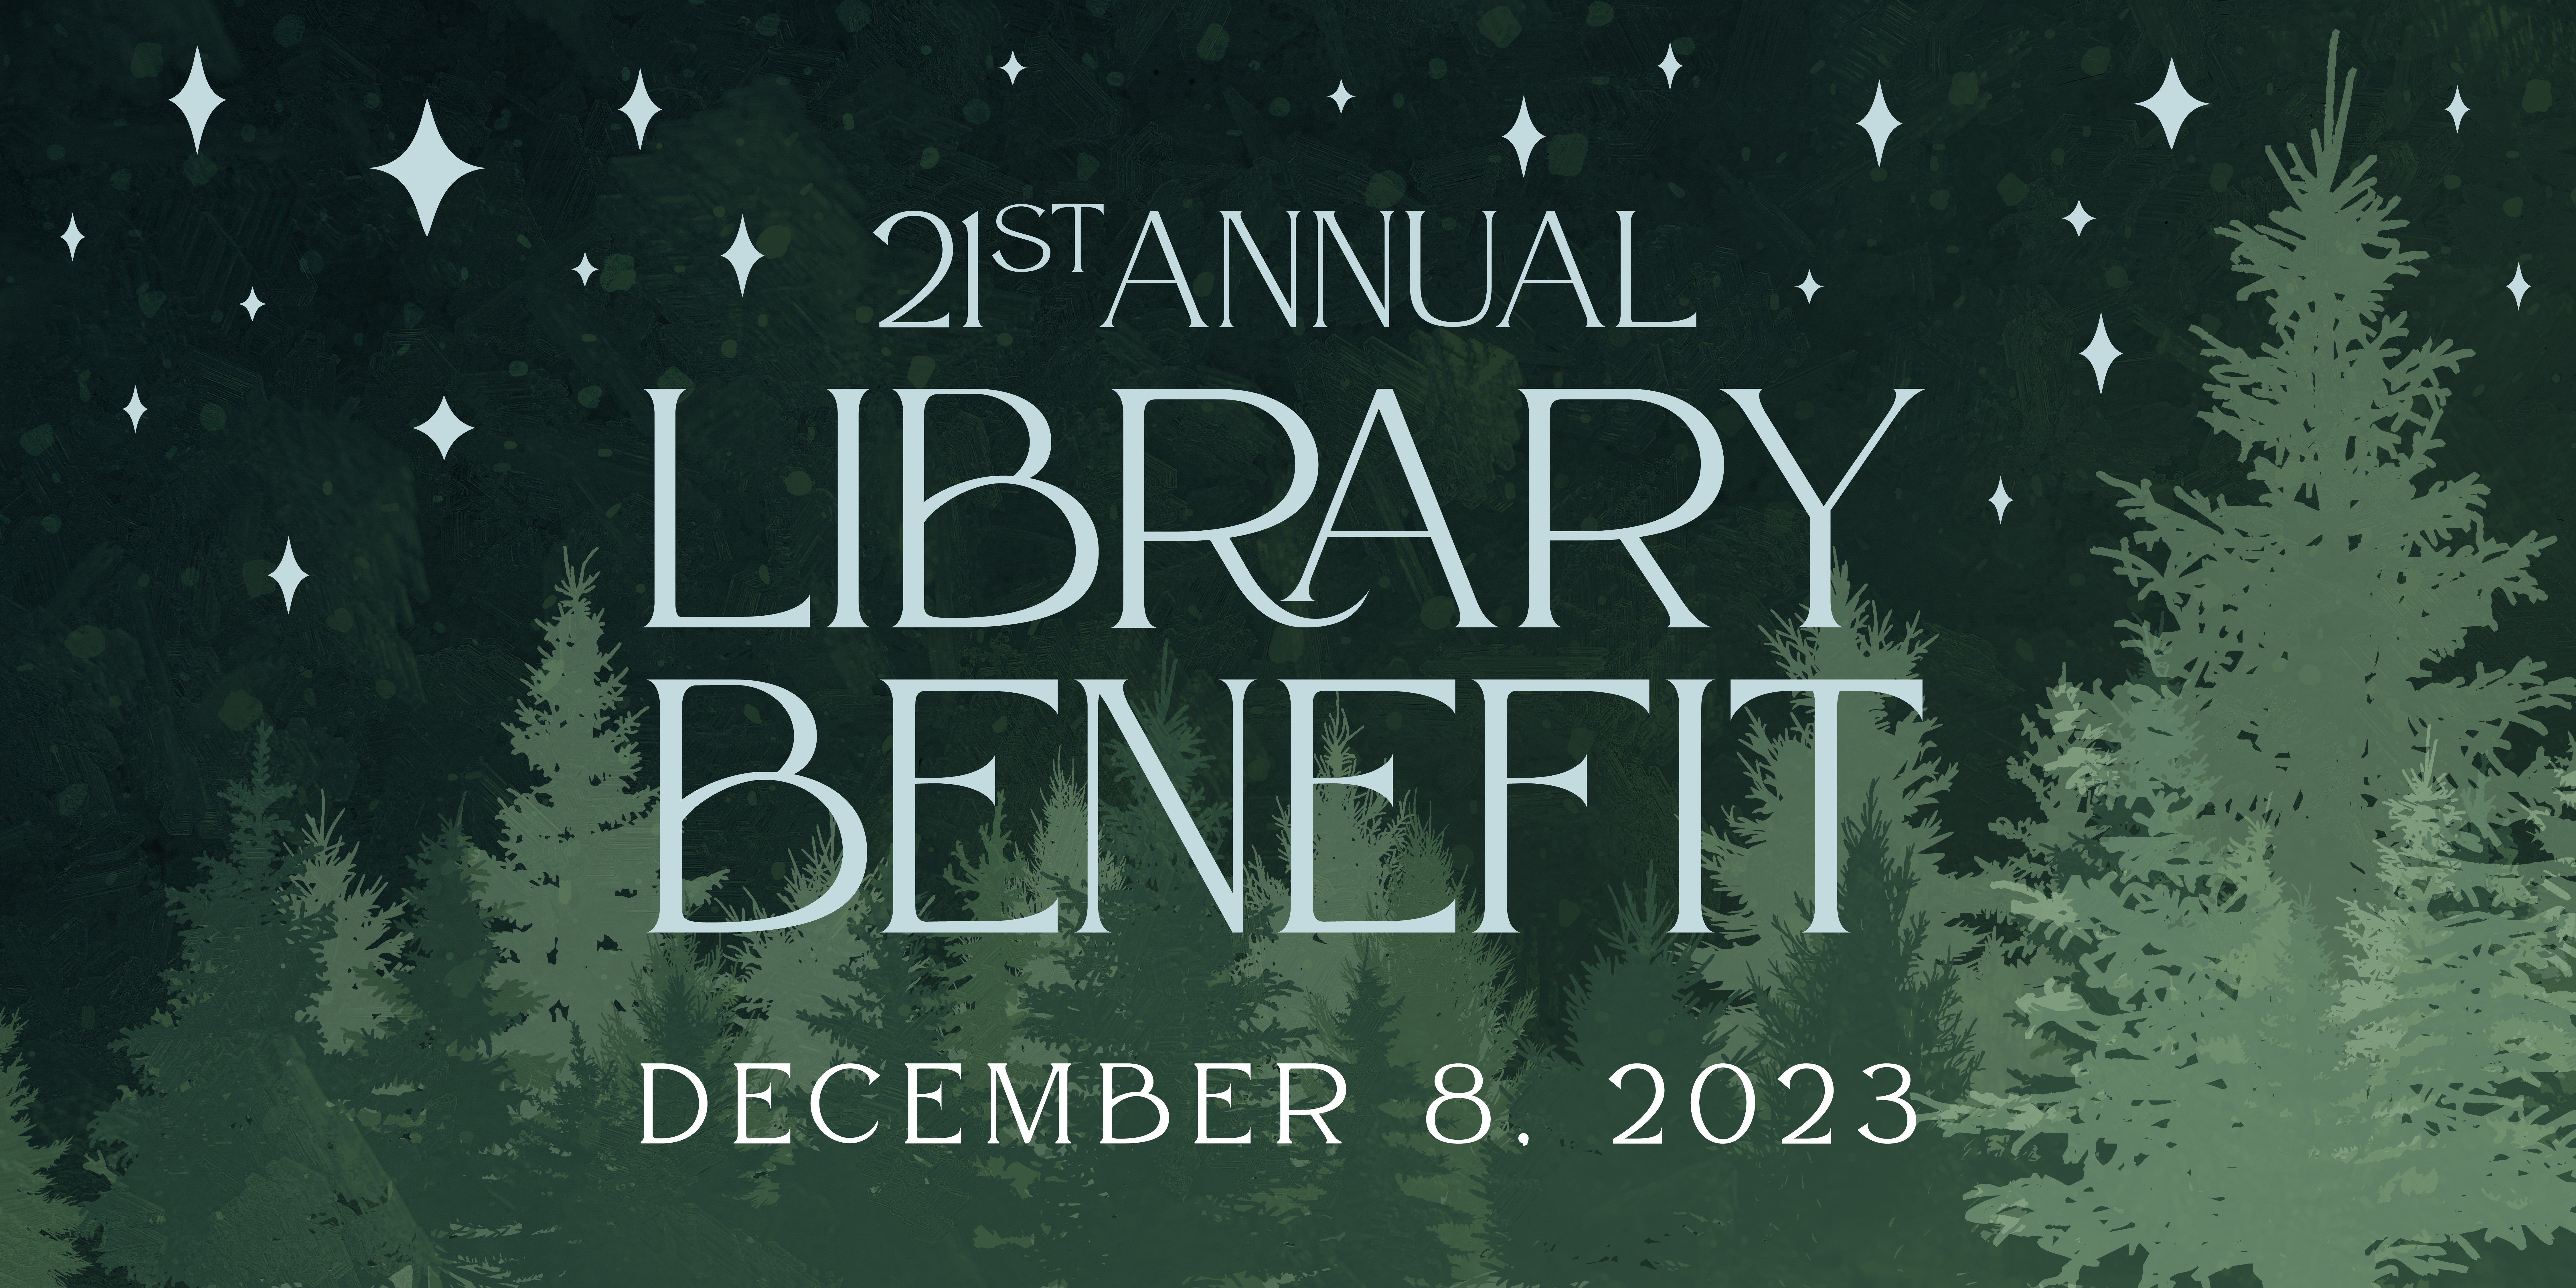 21st Annual Library Benefit